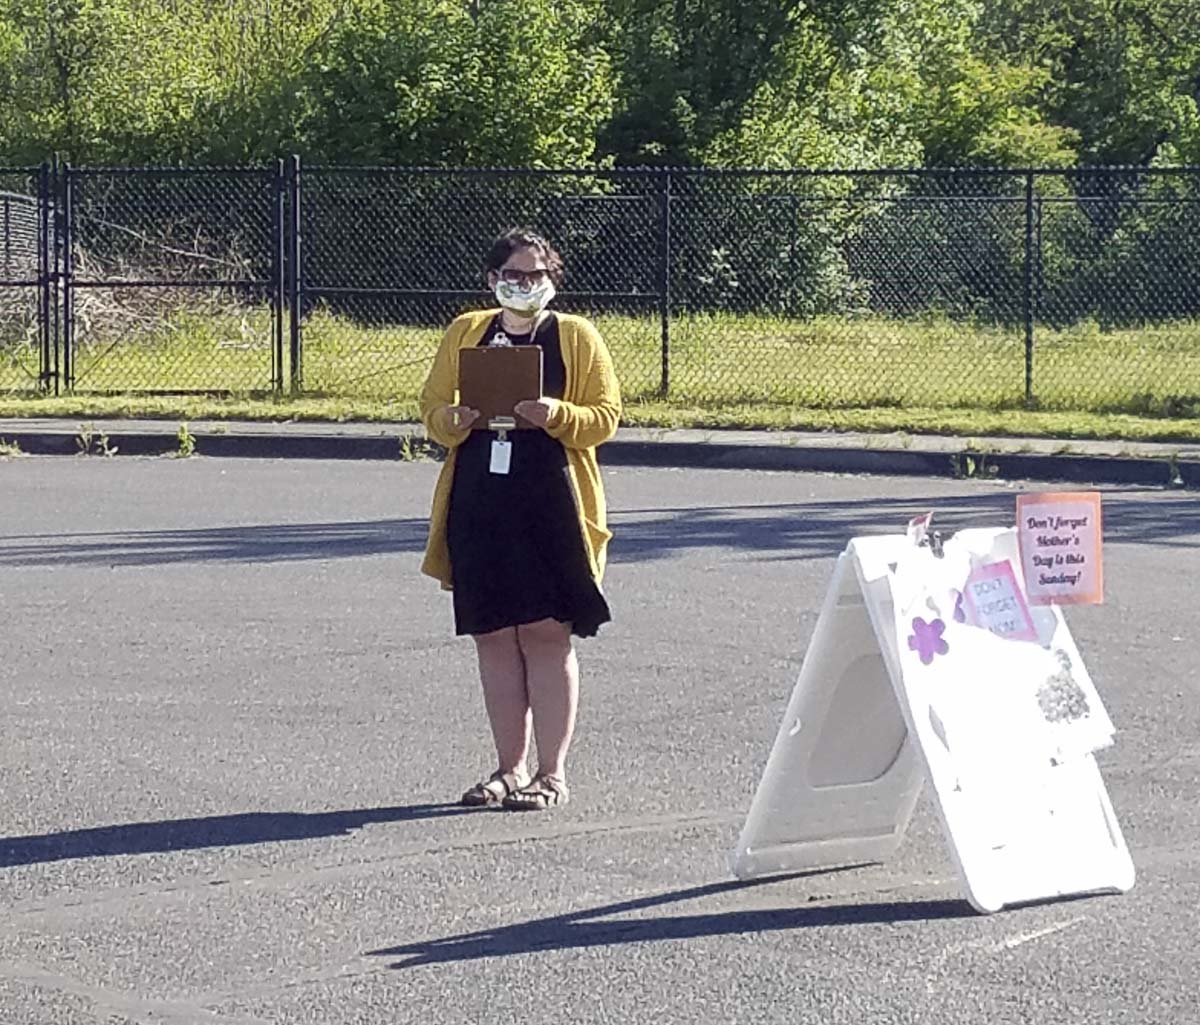 Nearly two dozen district employees helped make the plant sale happen like Stacy Gould pictured here wearing a mask while she checked in customers. Photo courtesy of Woodland Public Schools